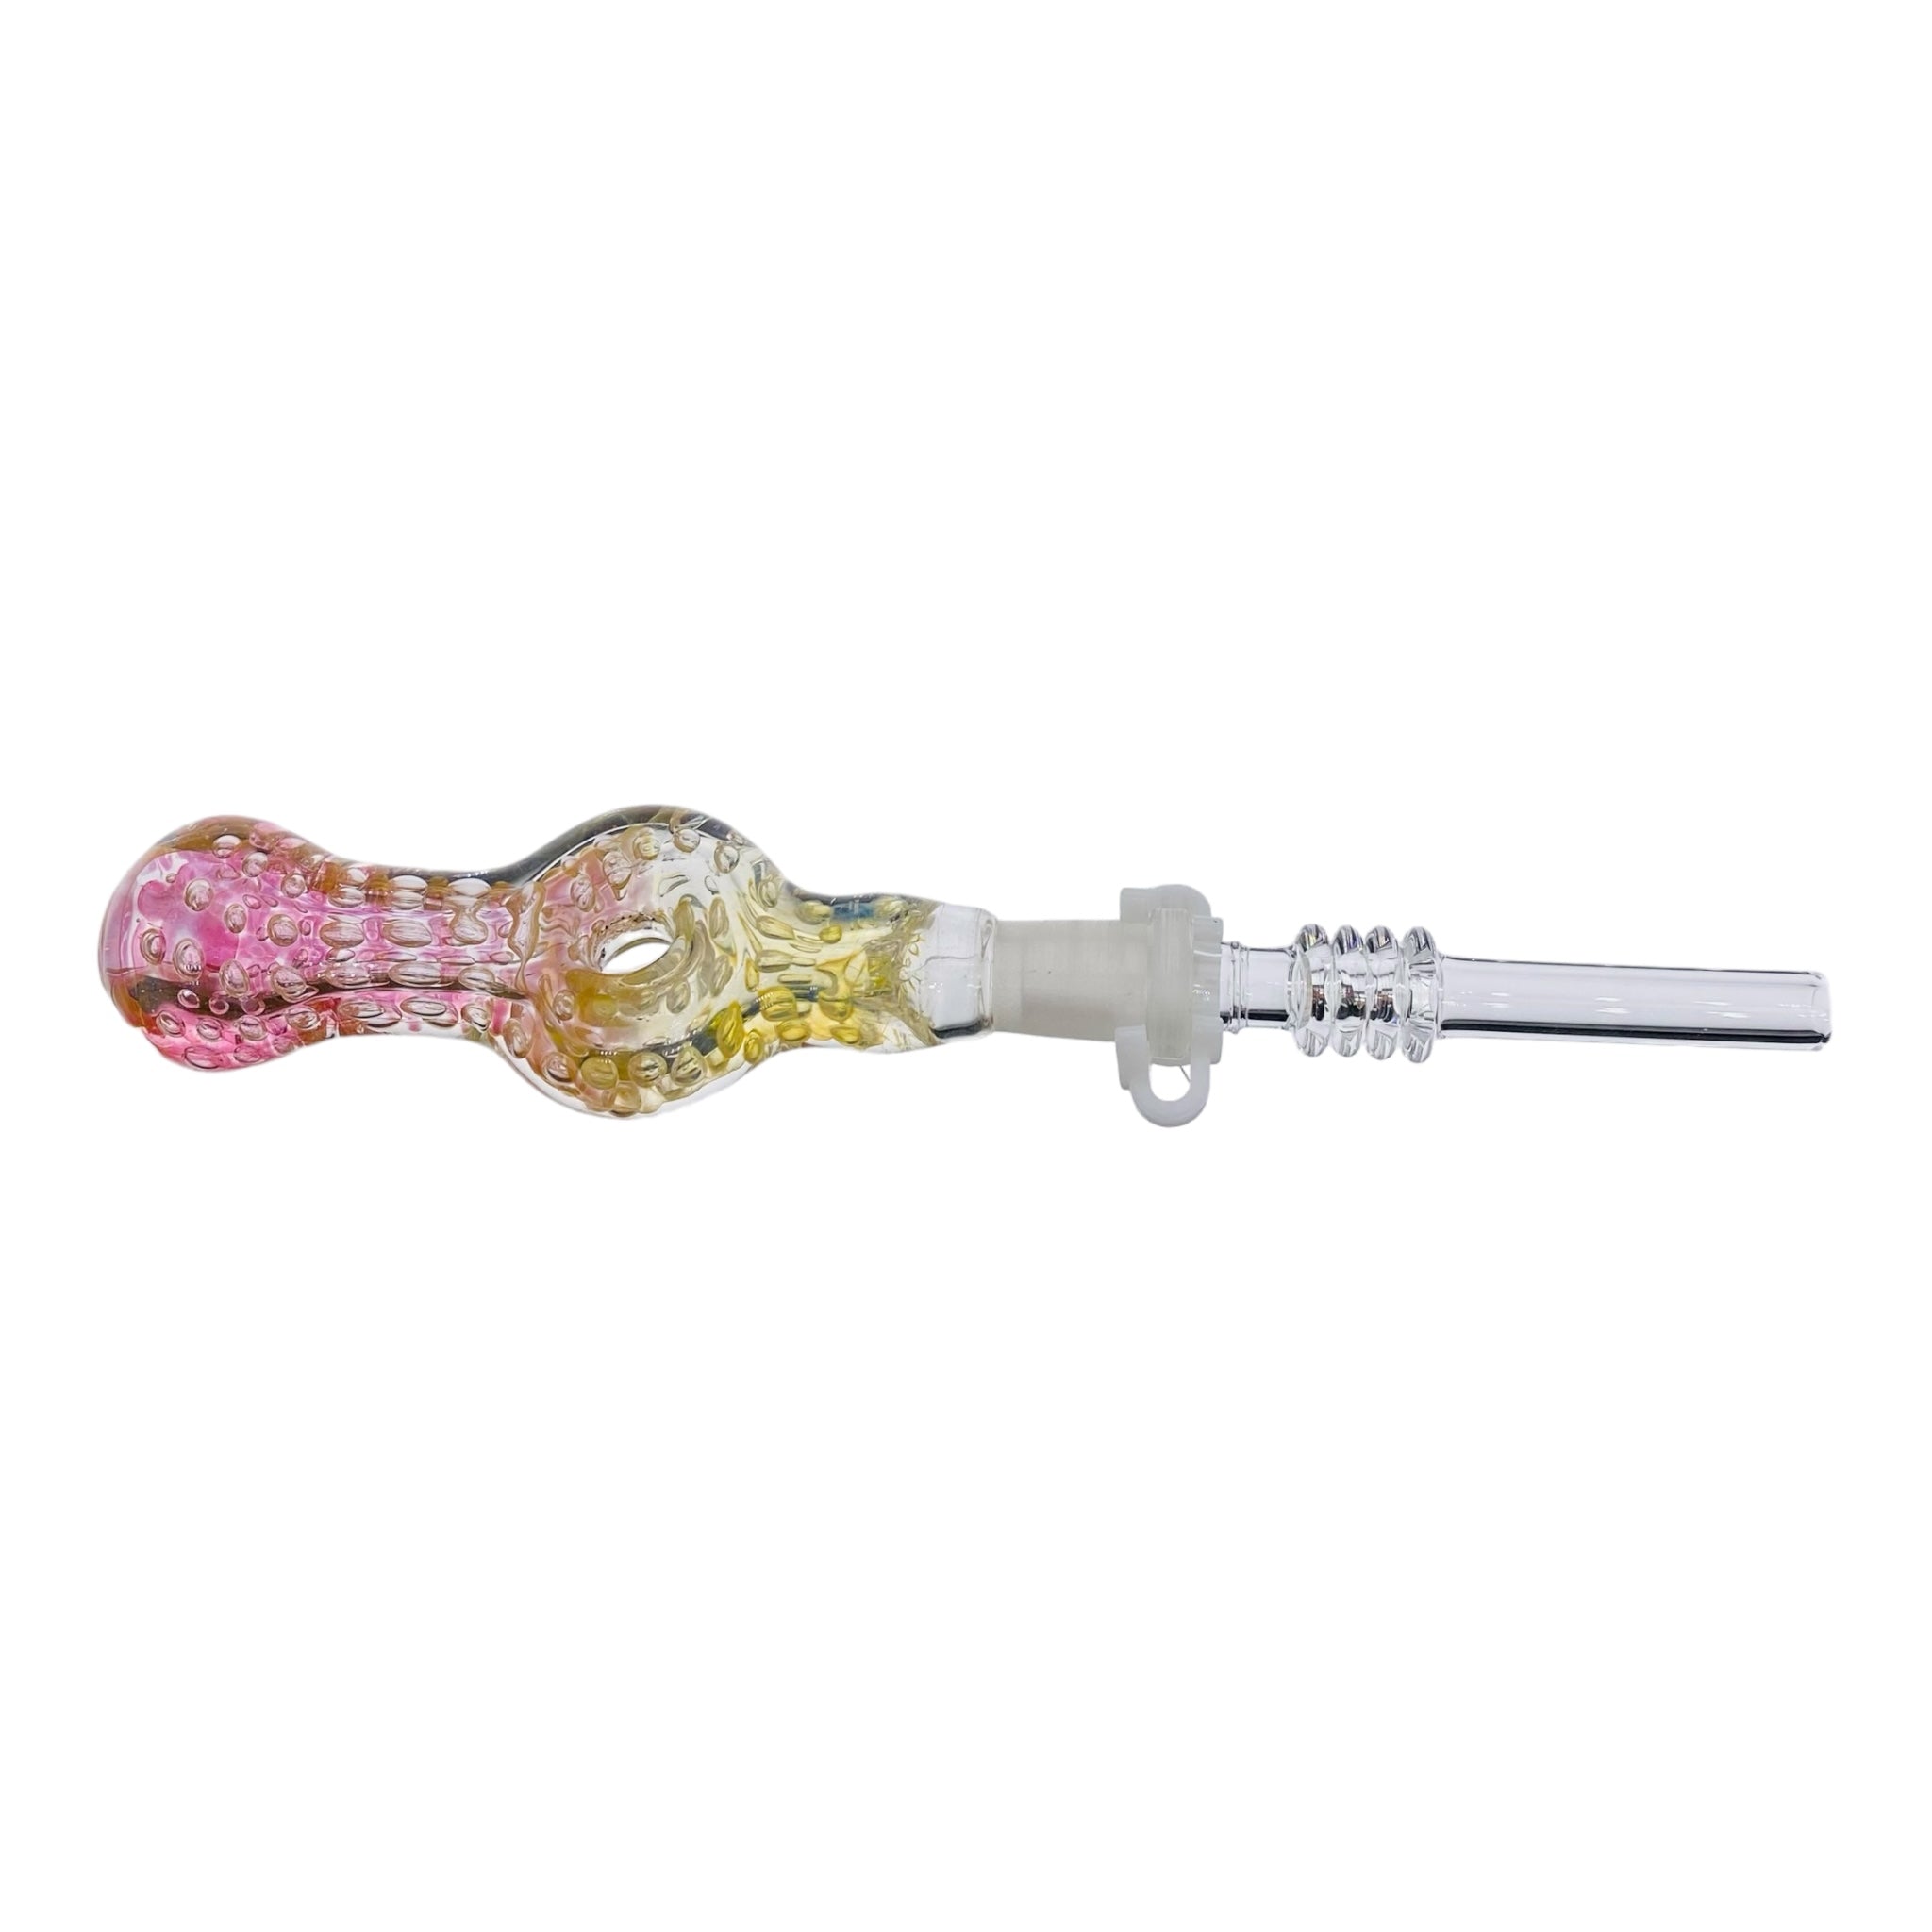 10mm Nectar Collector - Color Changing Fuming Inside Out Spiral Donut With Quartz Tip